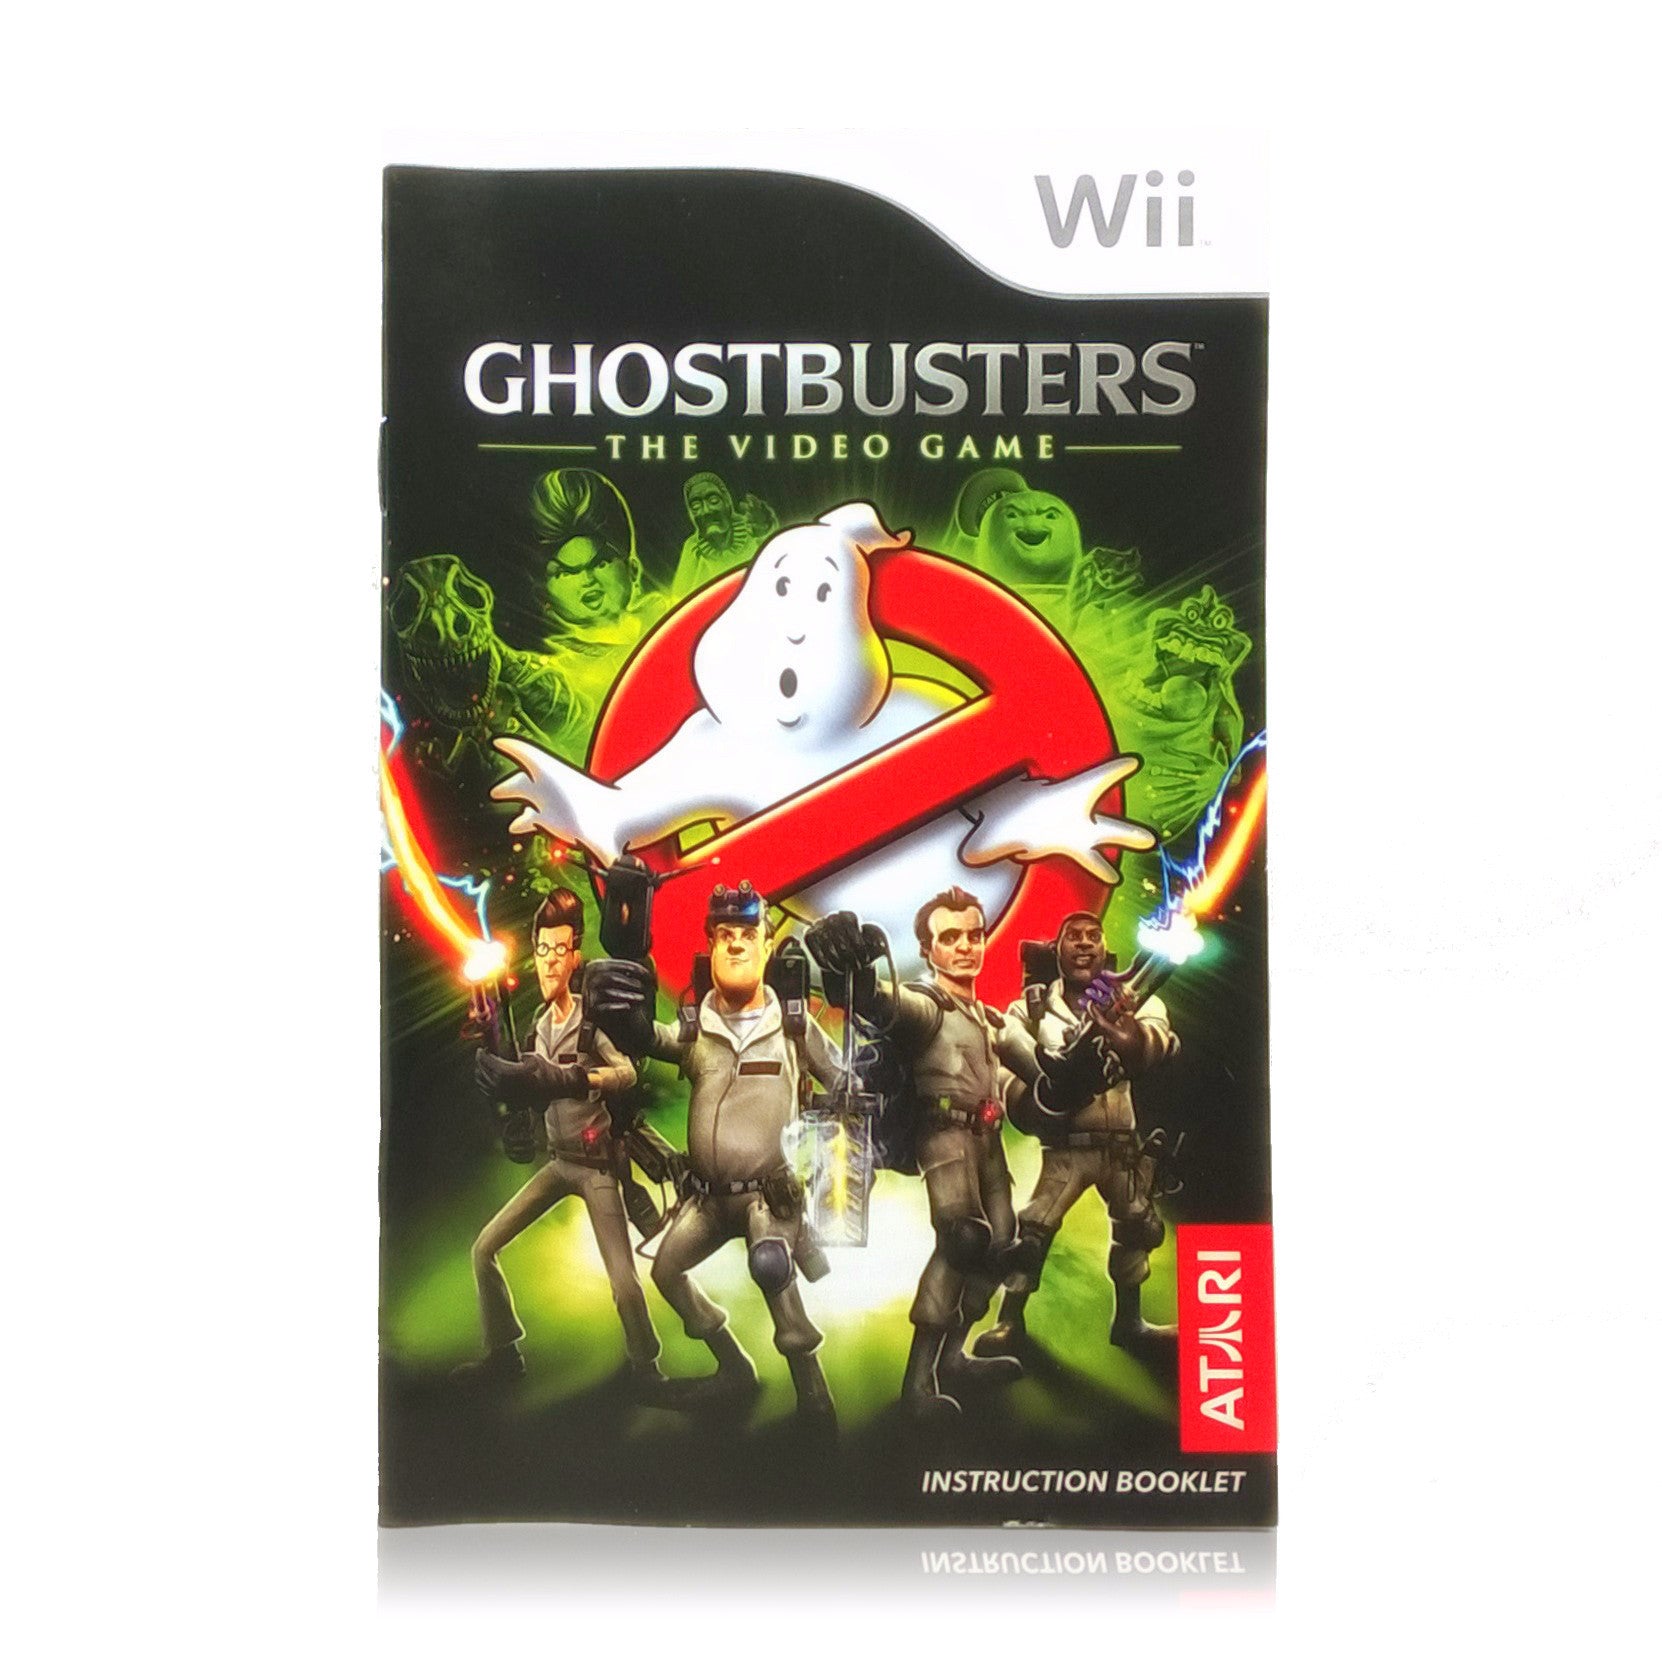 Ghostbusters: The Video Game Nintendo Wii Game - Manual